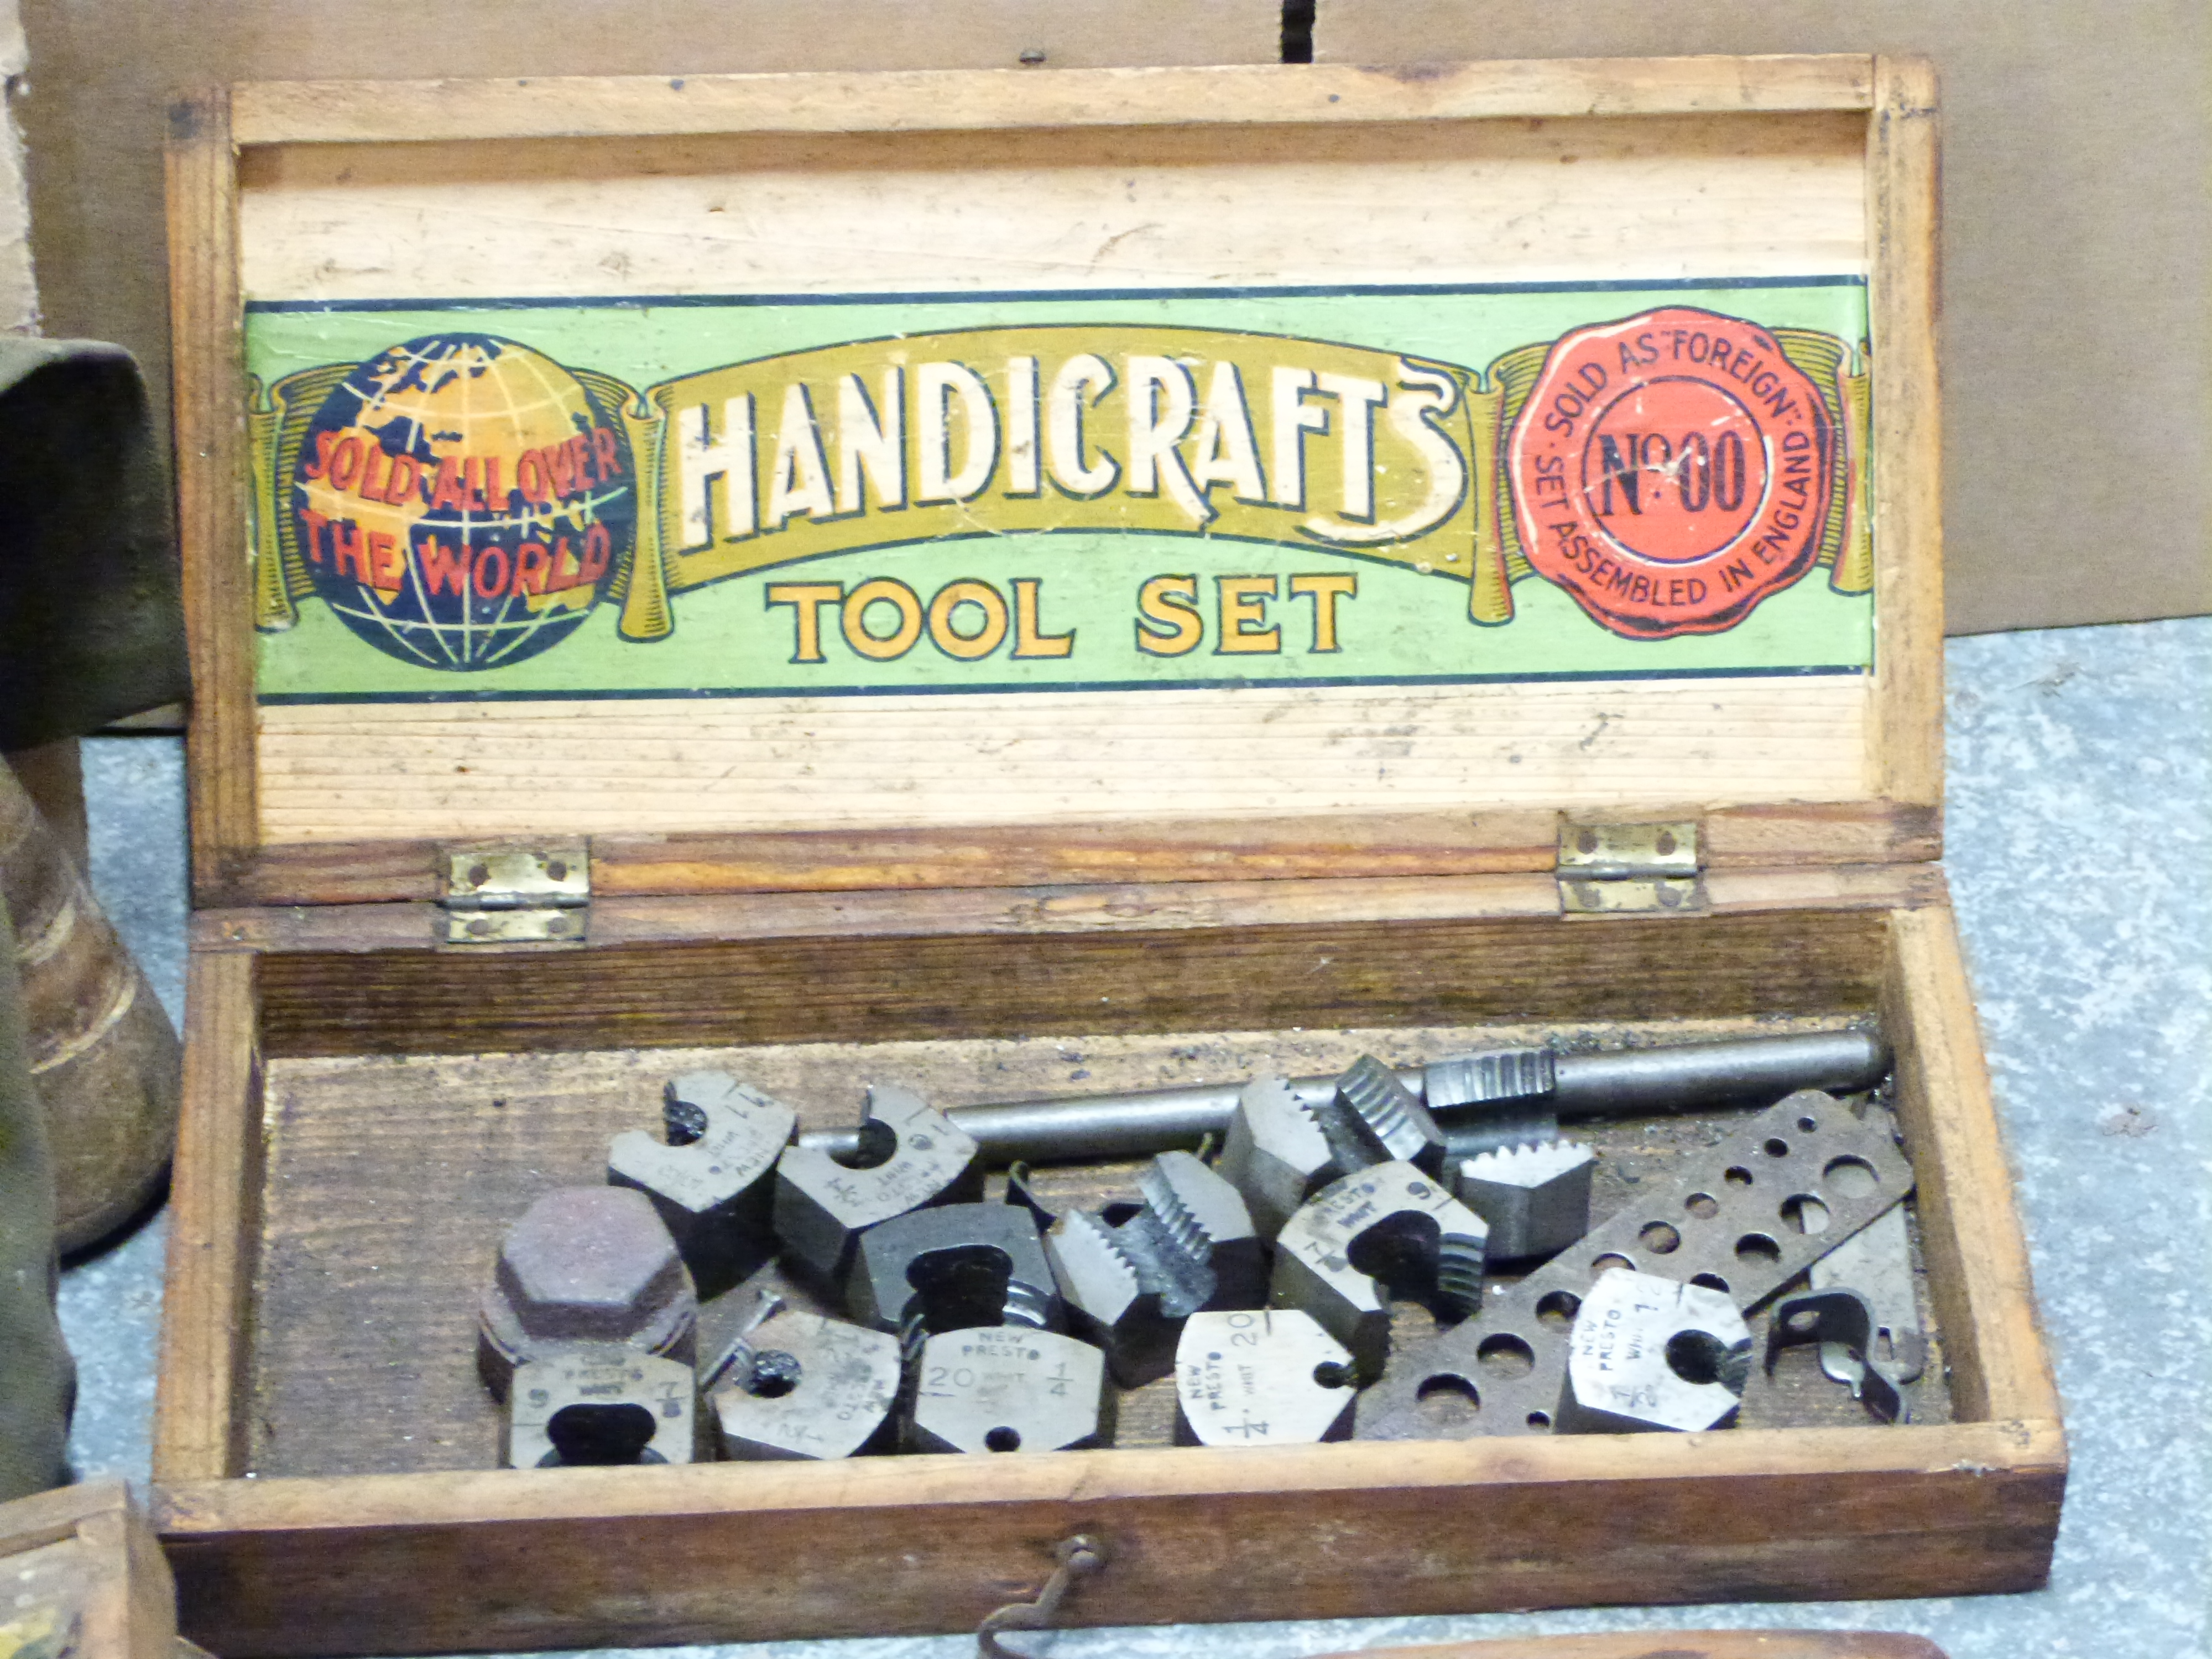 A collection of lead, engineering and woodworking tools including Rabone, top and die sets, chisels, - Image 2 of 4